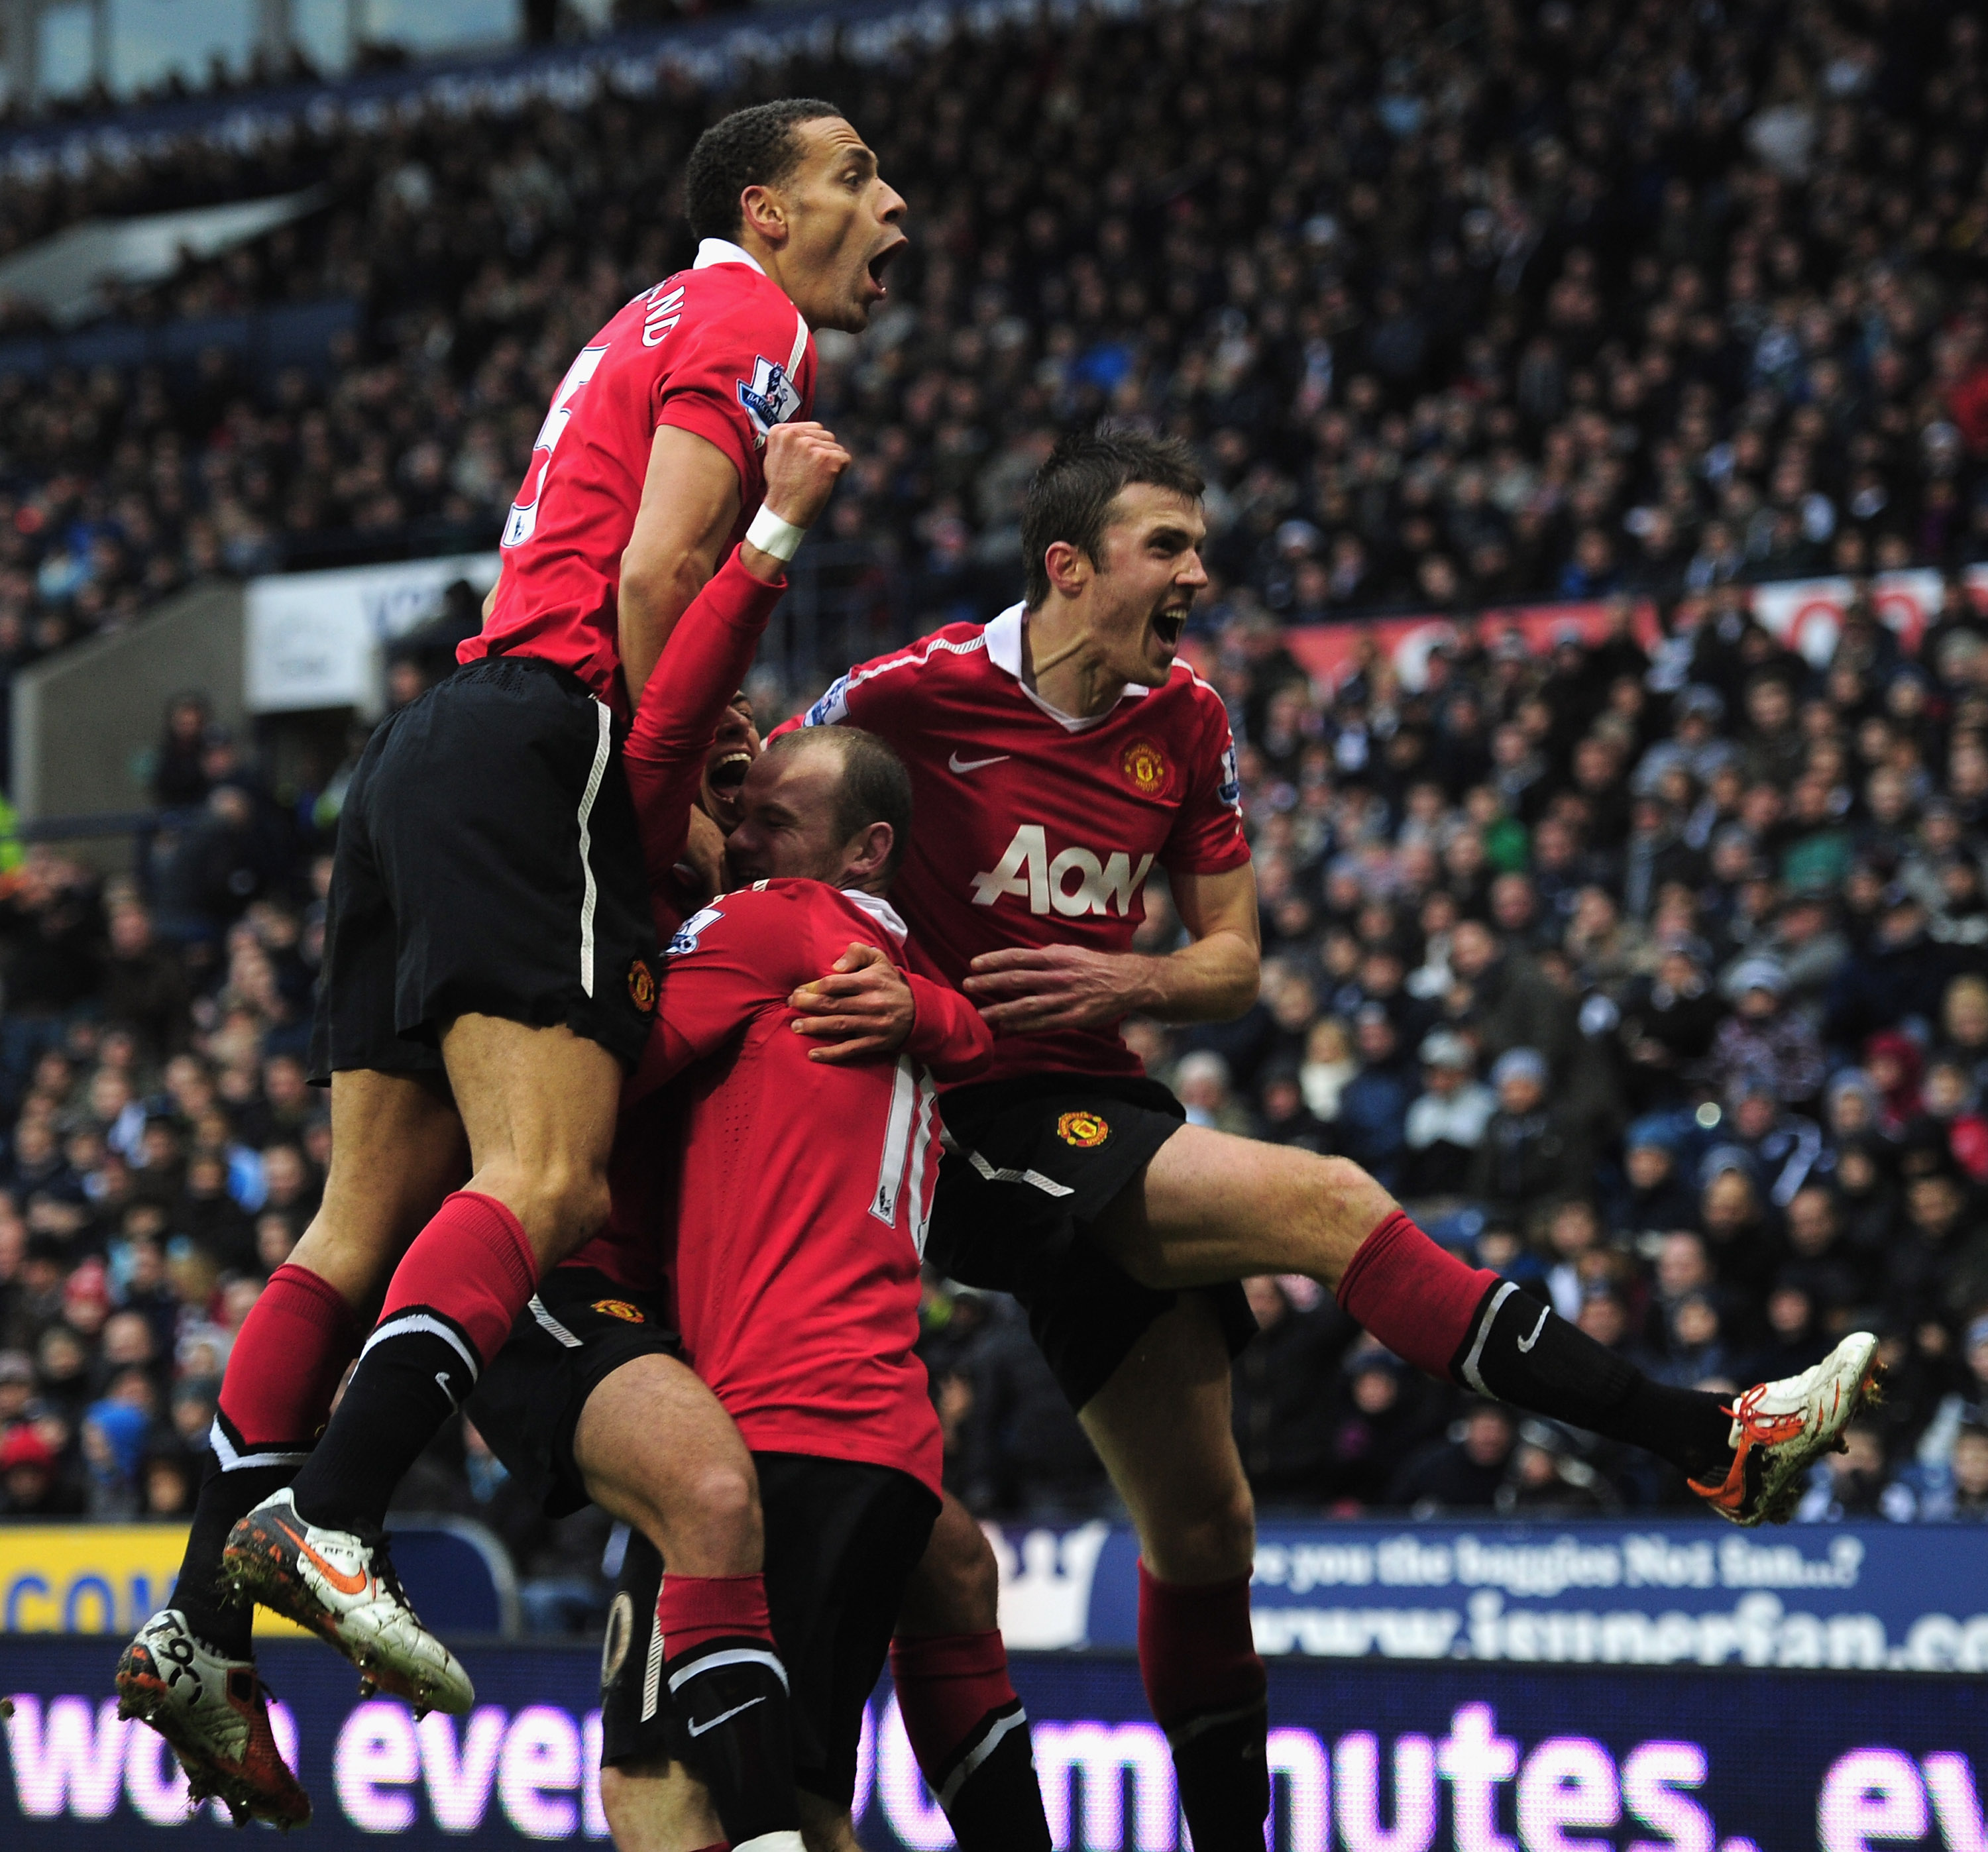 WEST BROMWICH, ENGLAND - JANUARY 01:  Javier Hernandez of Manchester United is congratulated by team-mates Rio Ferdinand, Michael Carrick and Wayne Rooney after scoring the winning goal during the Barclays Premier League match between West Bromich Albion